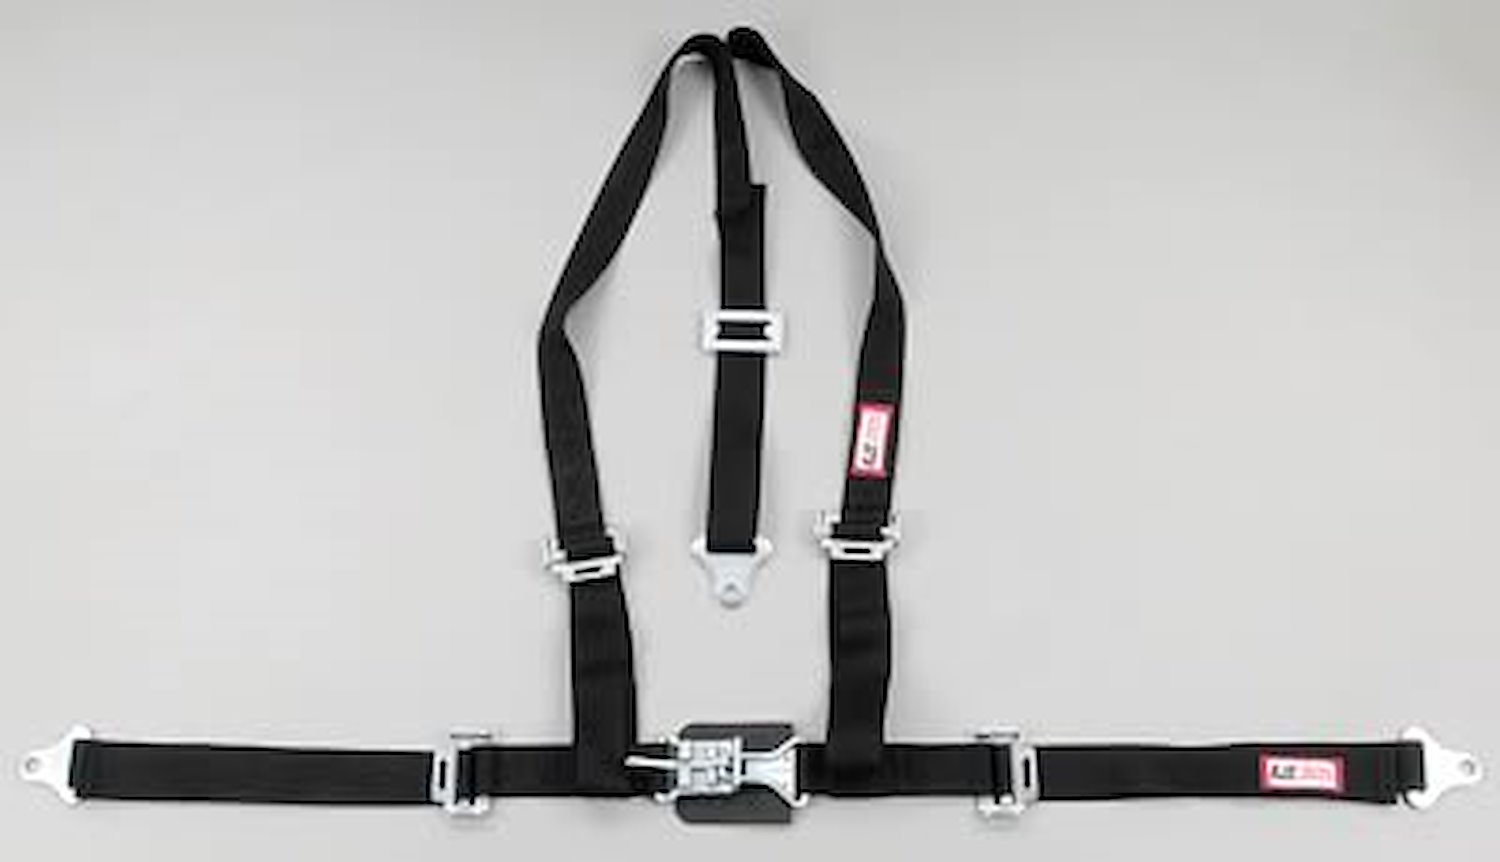 NON-SFI L&L HARNESS 3 PULL UP Lap Belt SEWN IN 2 Shoulder Harness V ROLL BAR Mount ALL SNAP ENDS PURPLE